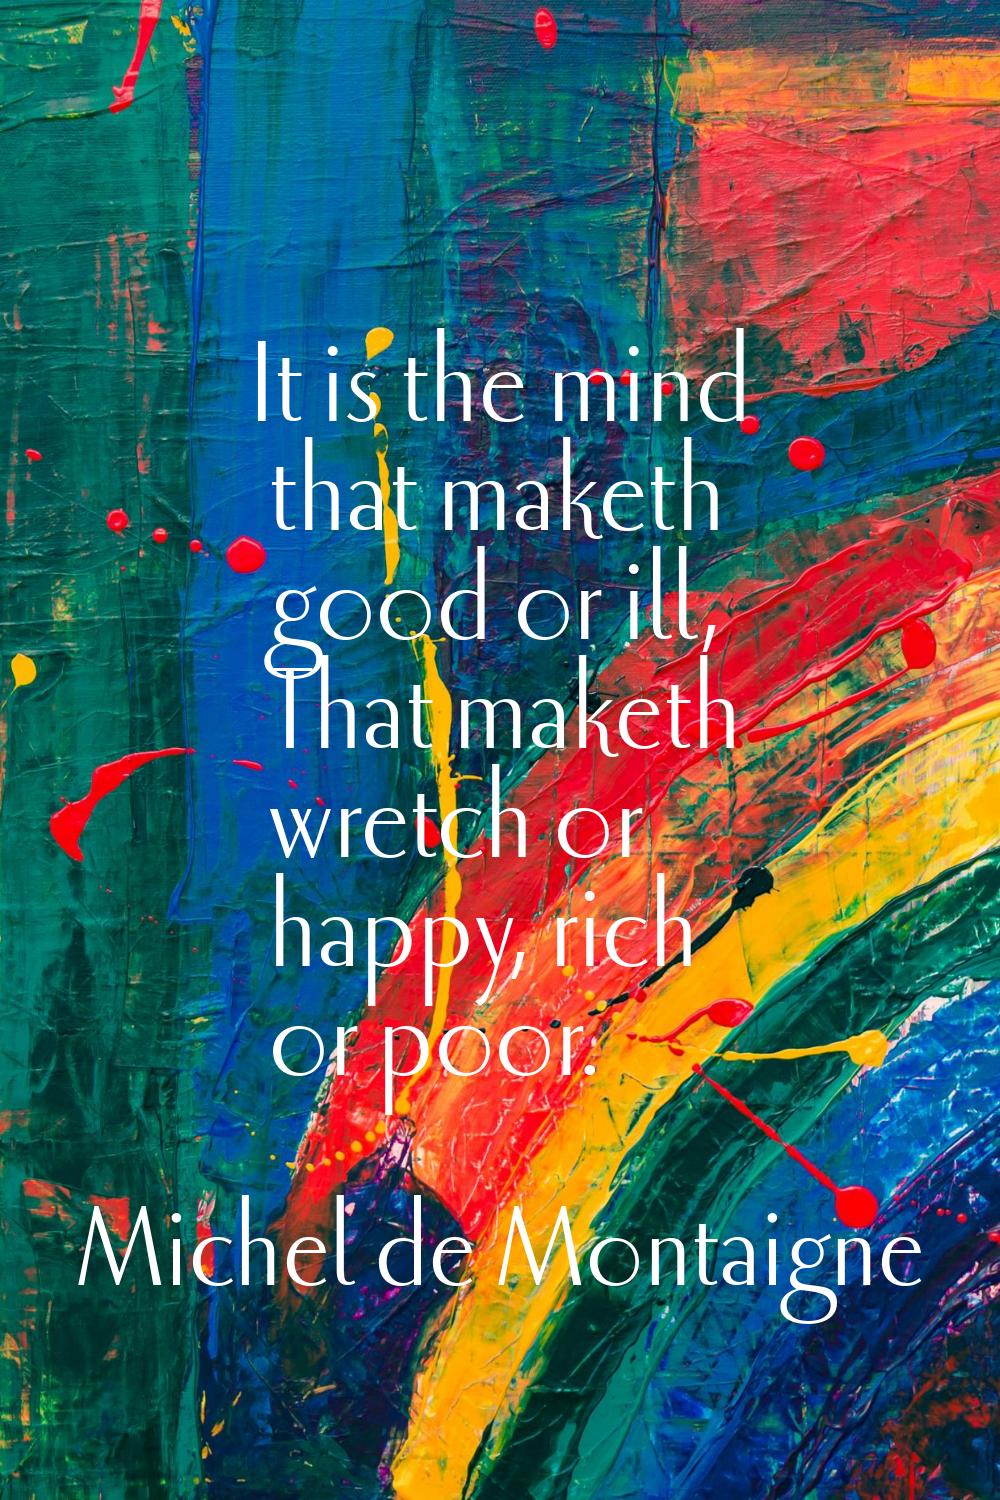 It is the mind that maketh good or ill, That maketh wretch or happy, rich or poor.